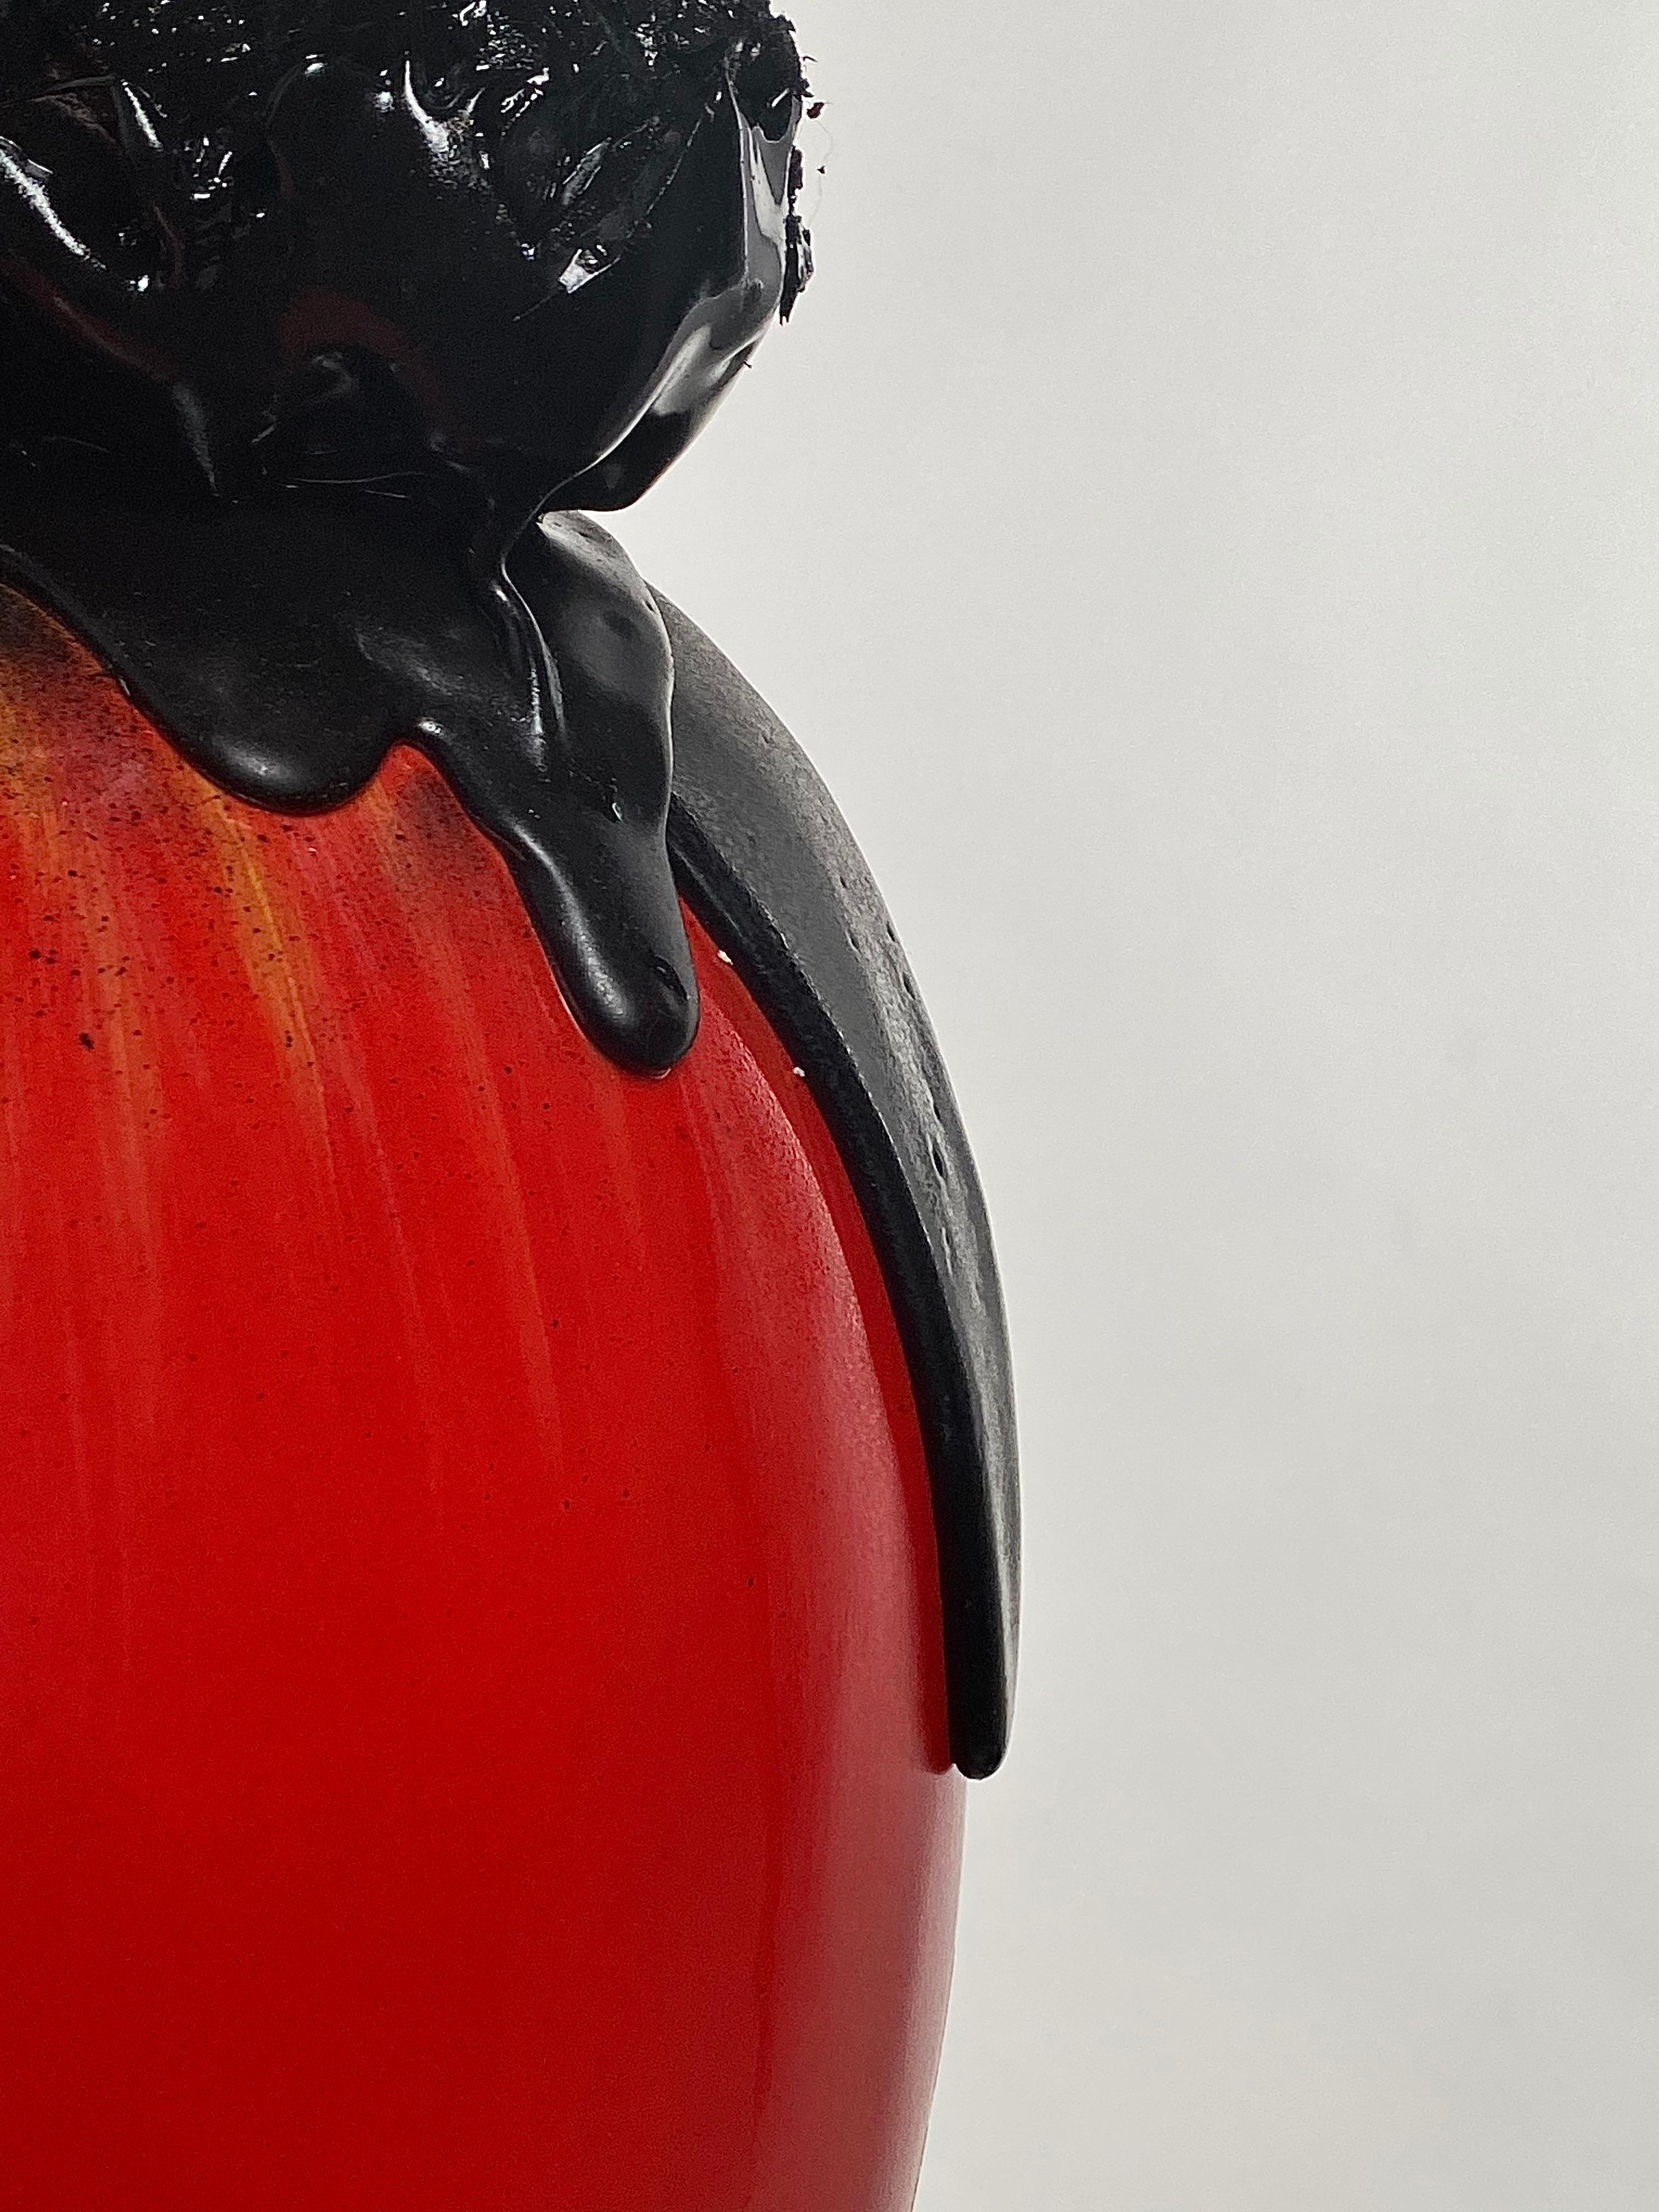 Black TAR Teddy and Red Apple Sculpture, 21st Century by Mattia Biagi In New Condition For Sale In Culver City, CA